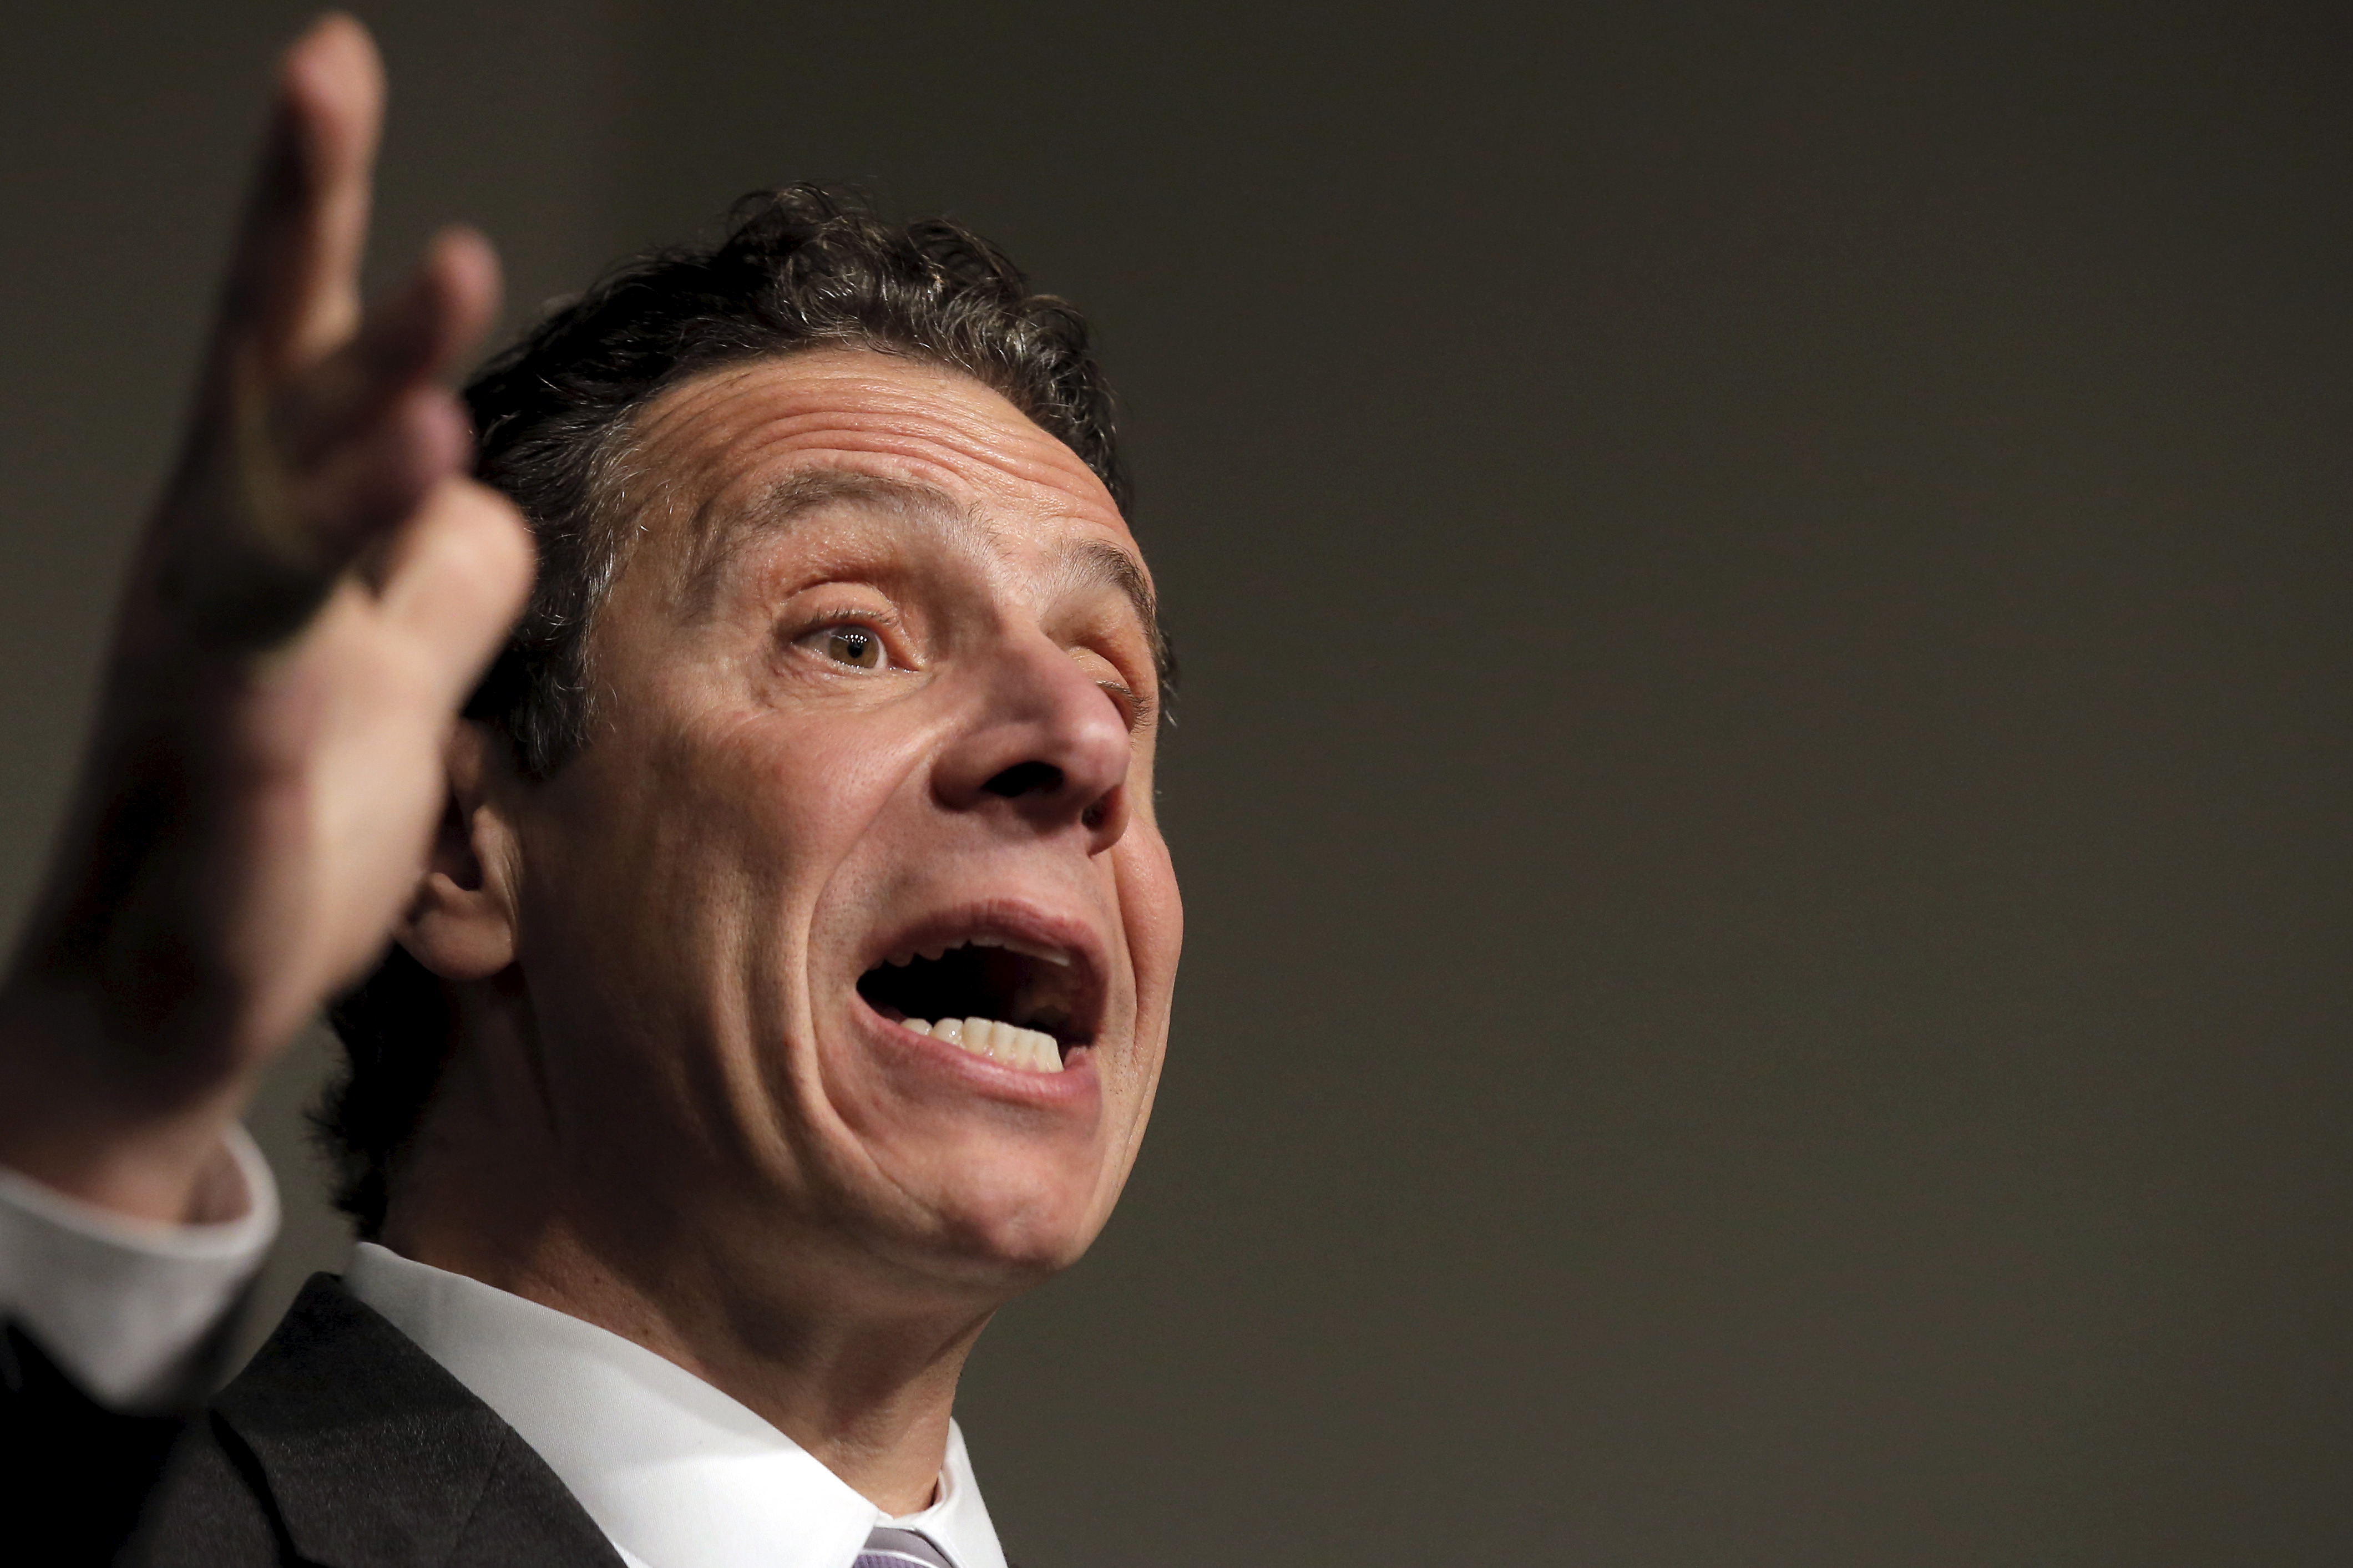 The New York governor takes on a basic right.